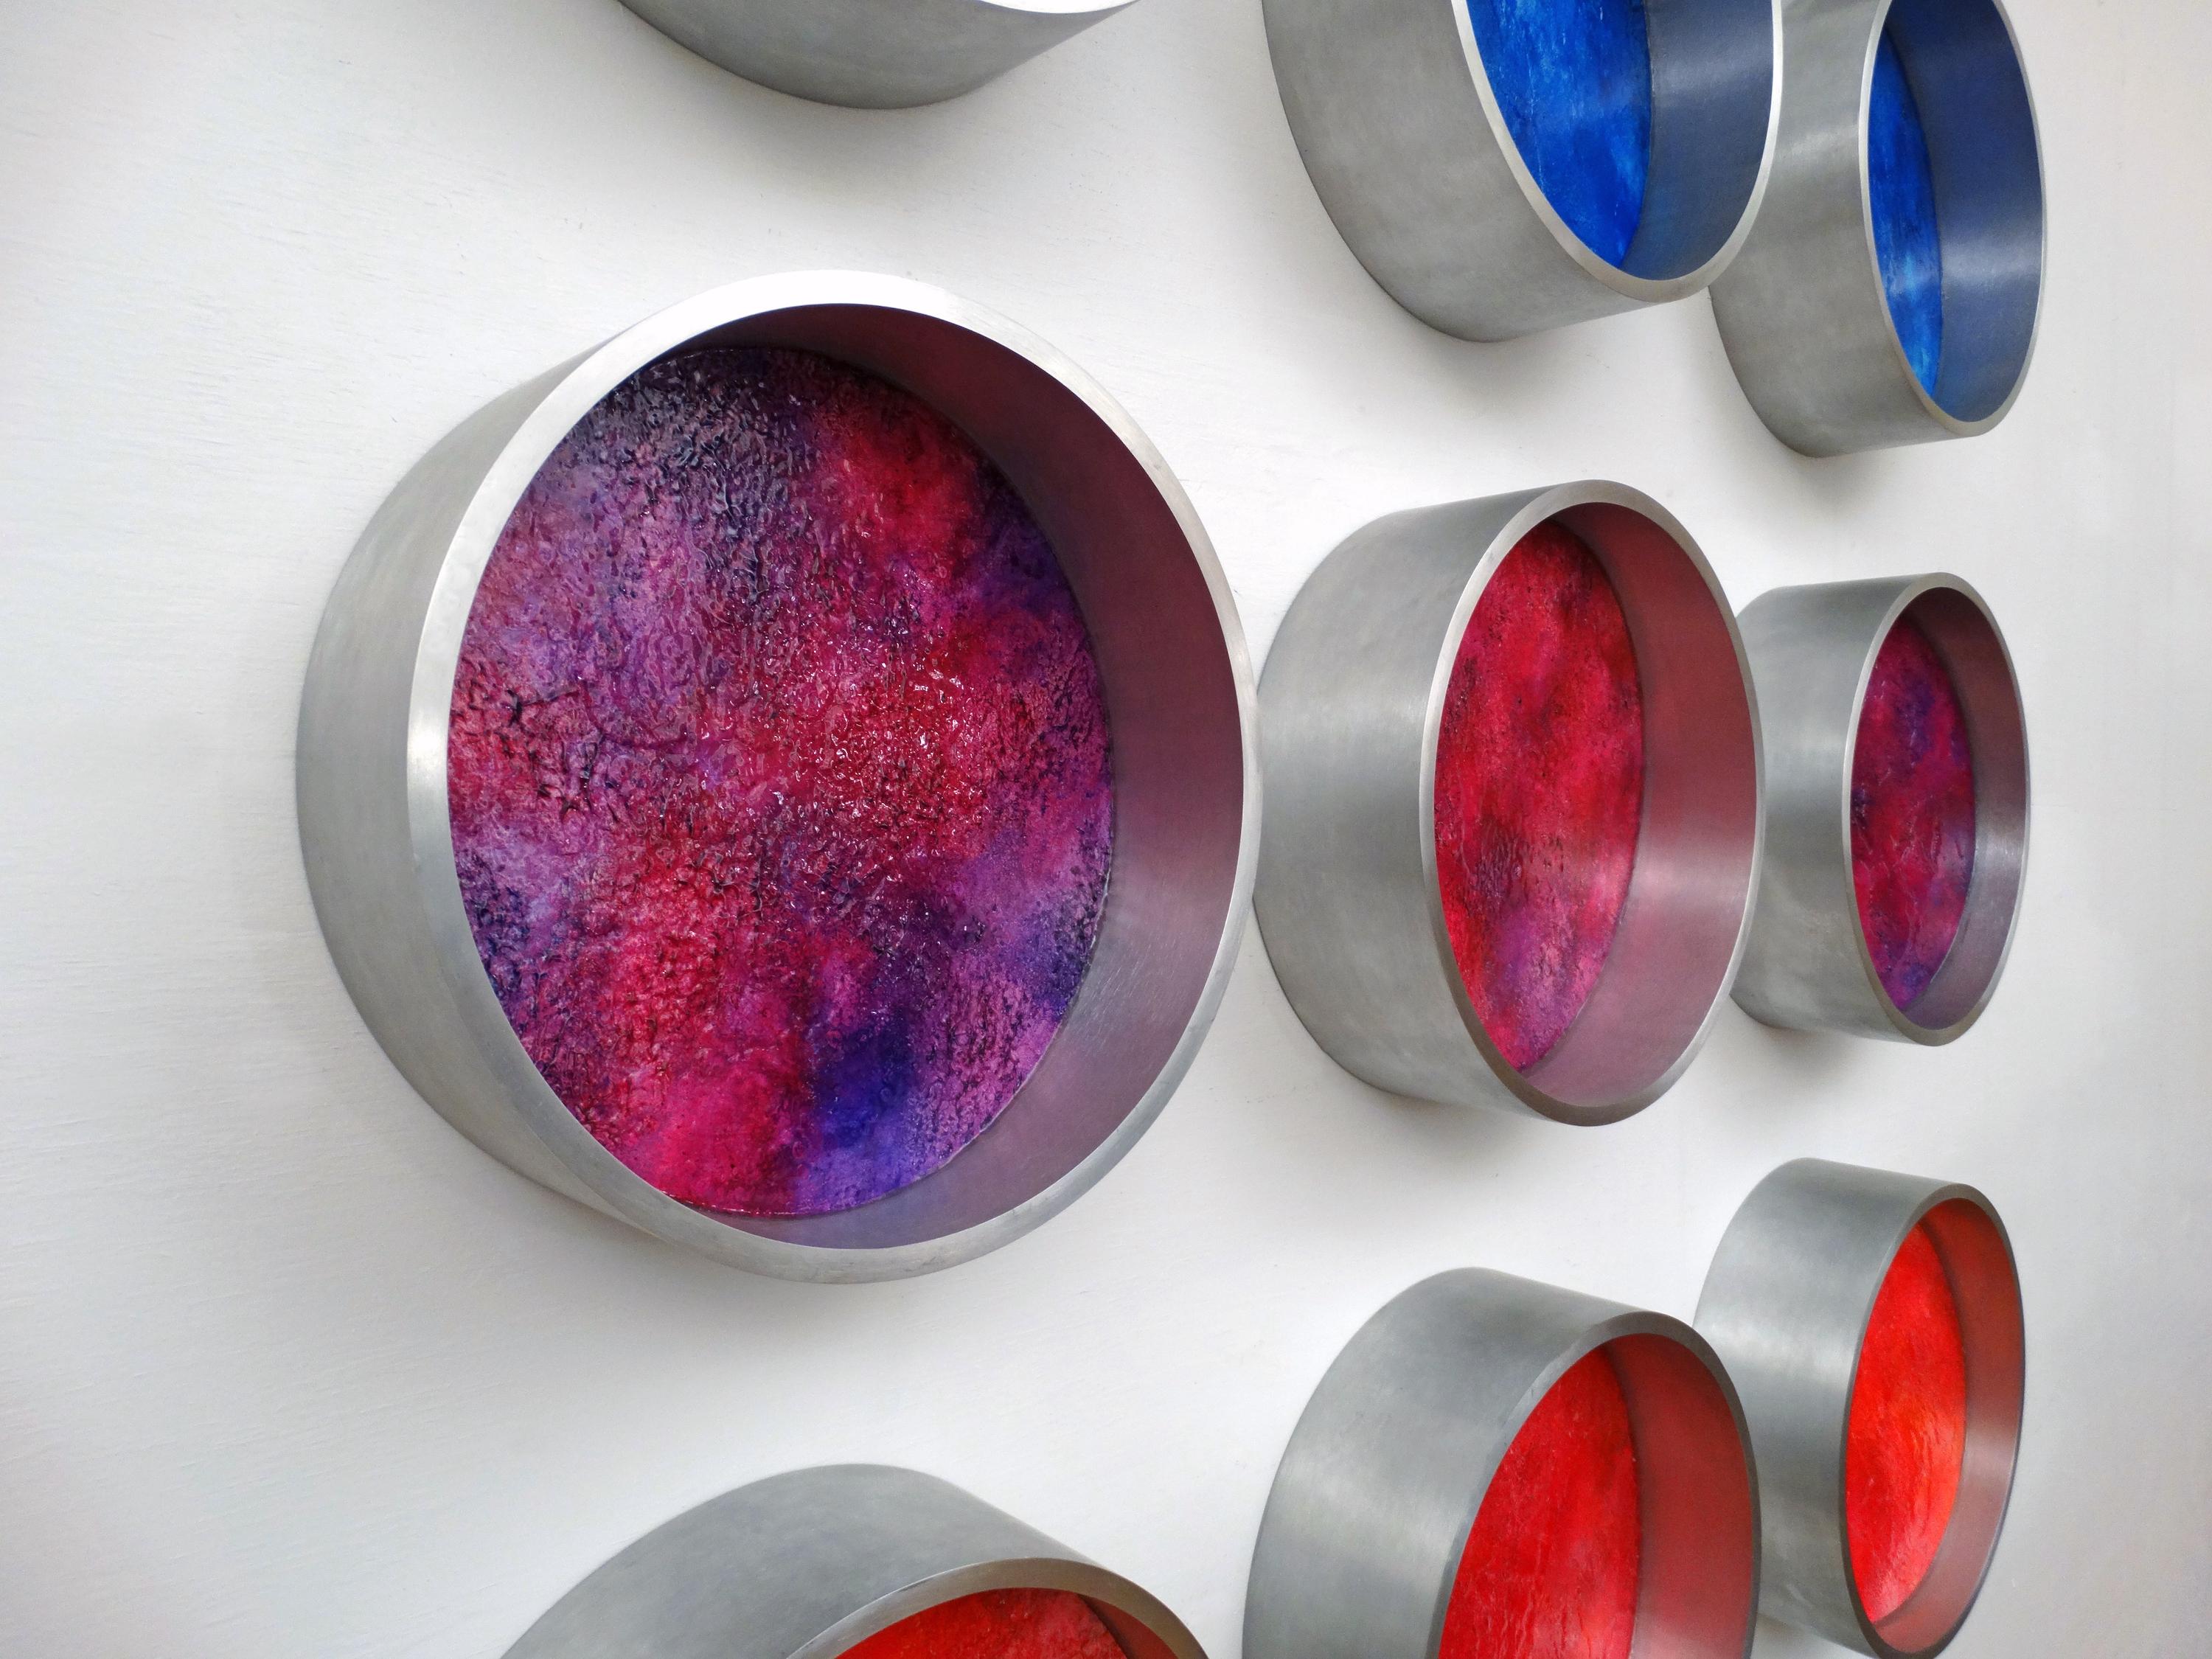 15 panels, 10.5” diameter x 3.5” depth each

Daybreak is a multi component wall installation with a gradient color range meant to mimic the break of dawn and takes inspiration from the Florida coastline. 

repurposed industrial pipe with acrylic on